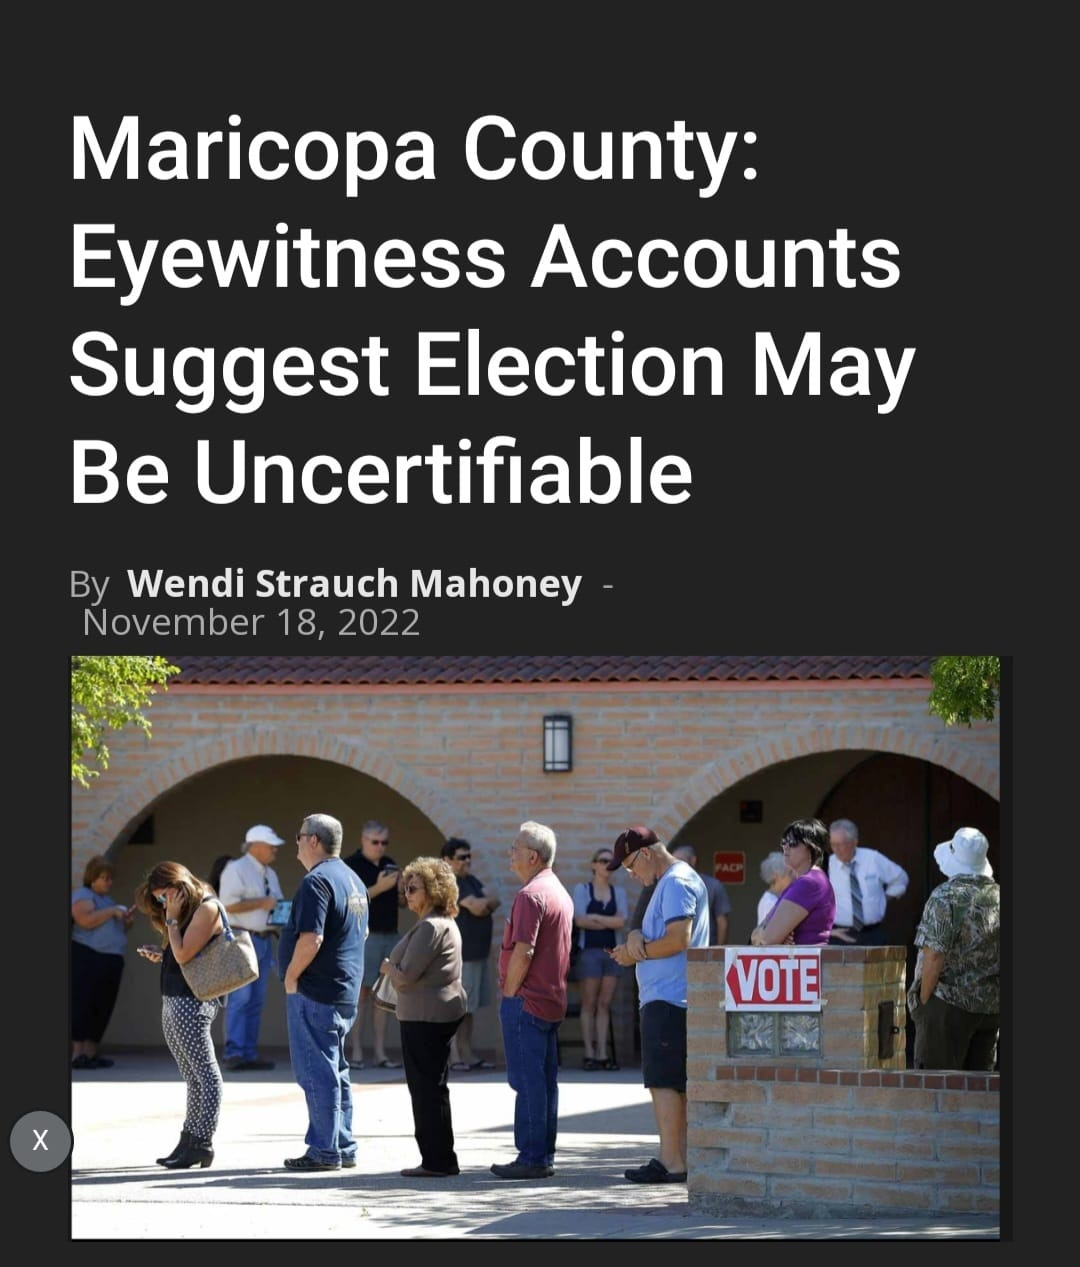 May be an image of 12 people, people standing and text that says 'Maricopa County: Eyewitness Accounts Suggest Election May Be Uncertifiable By Wendi Strauch Mahoney November 18, 2022 VOTE'